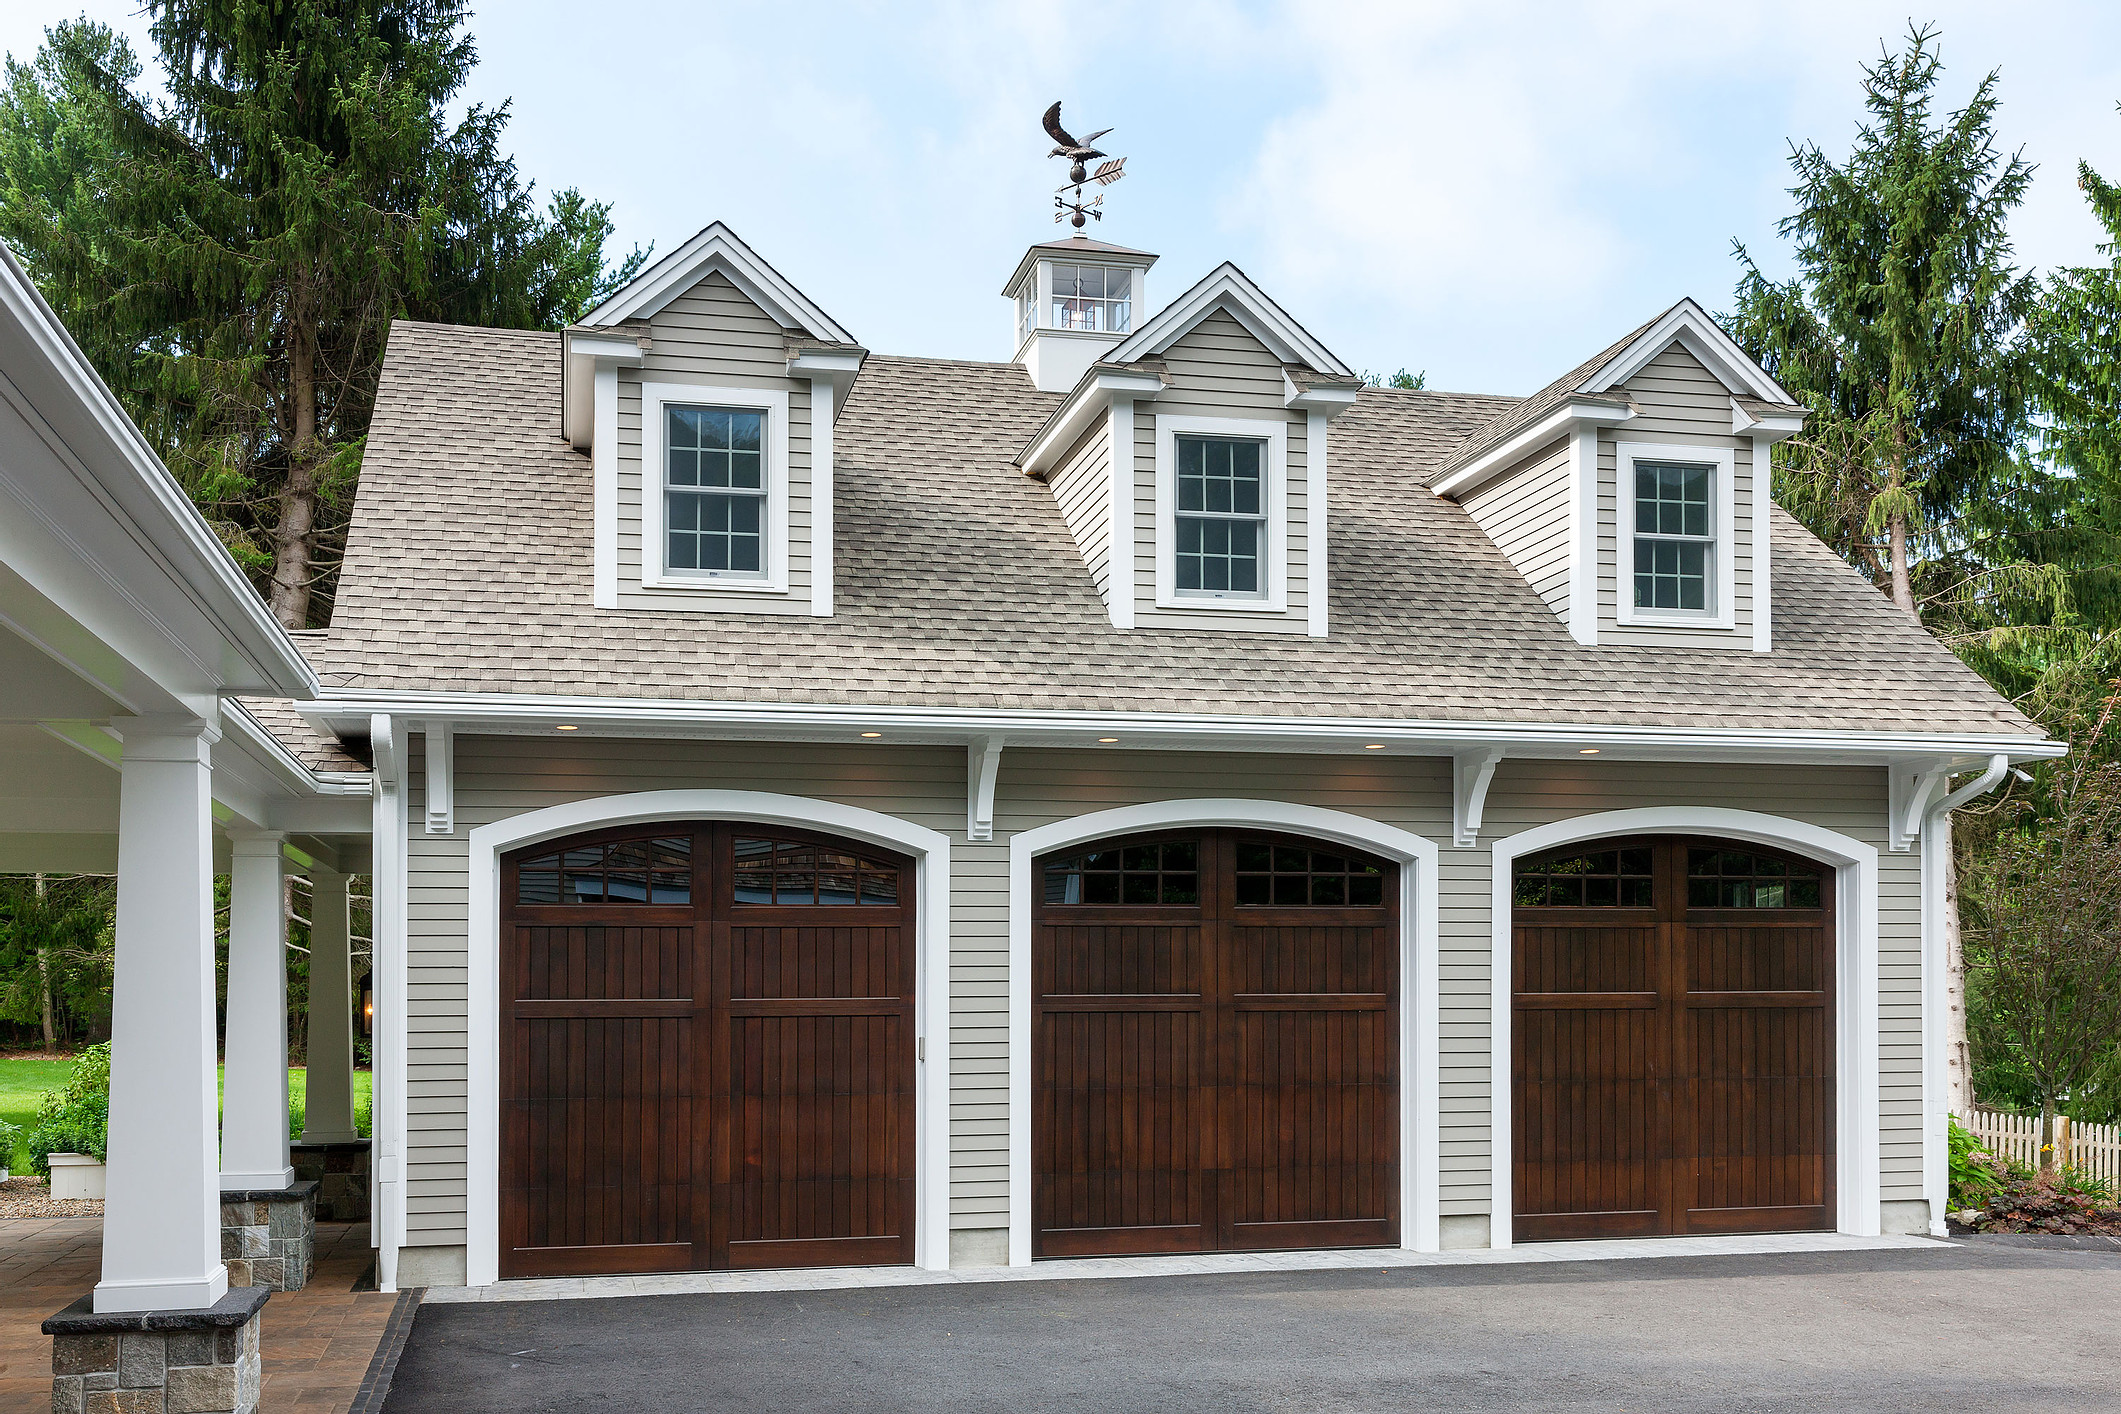 new carriage house addition in medfield, massachusetts